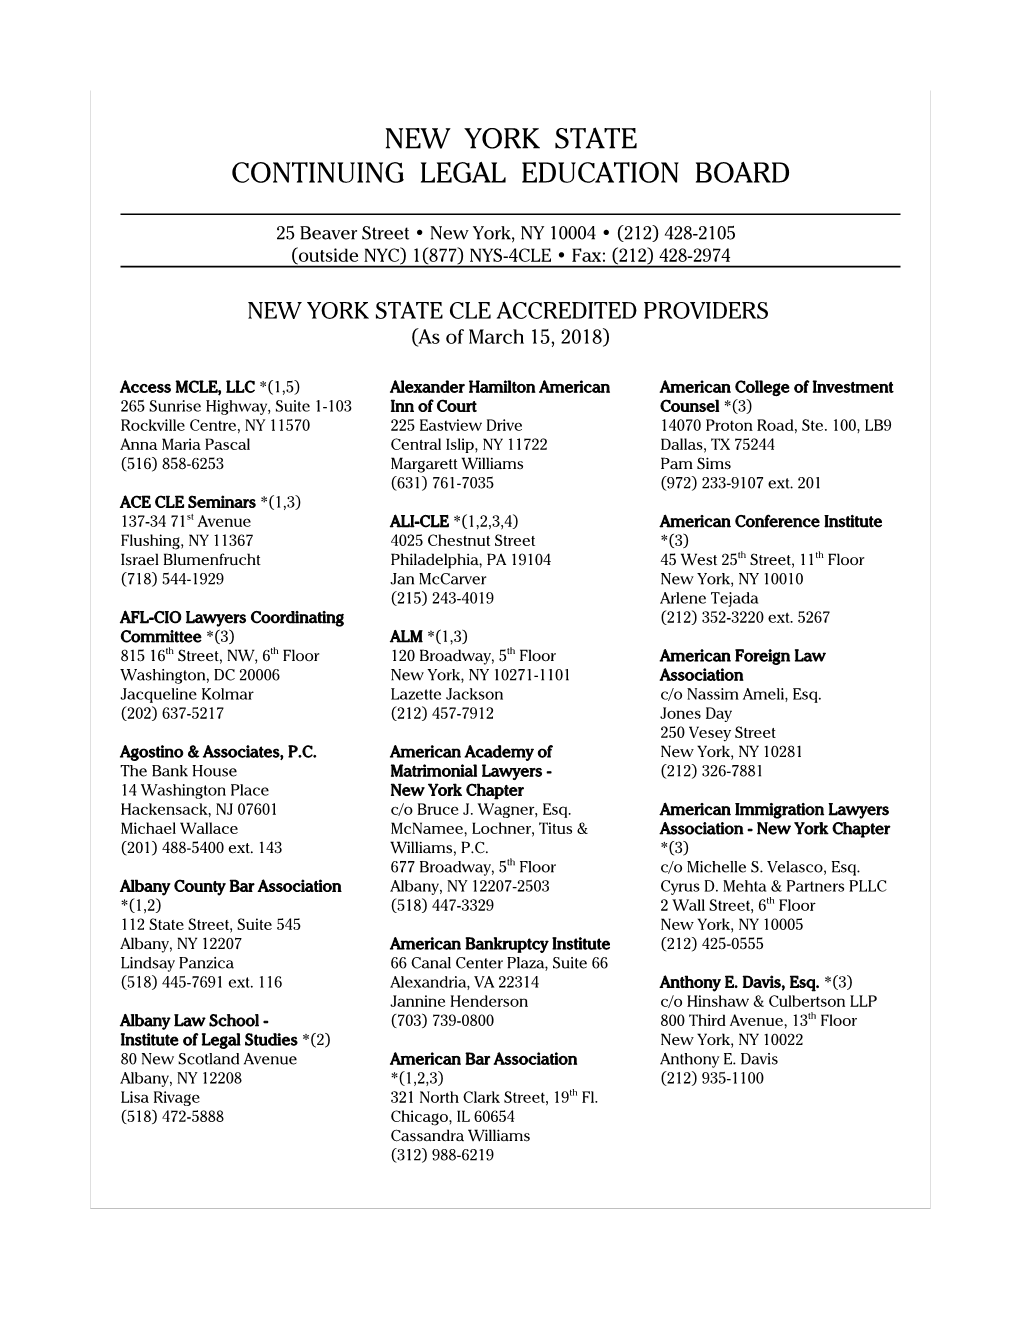 New York State Continuing Legal Education Board